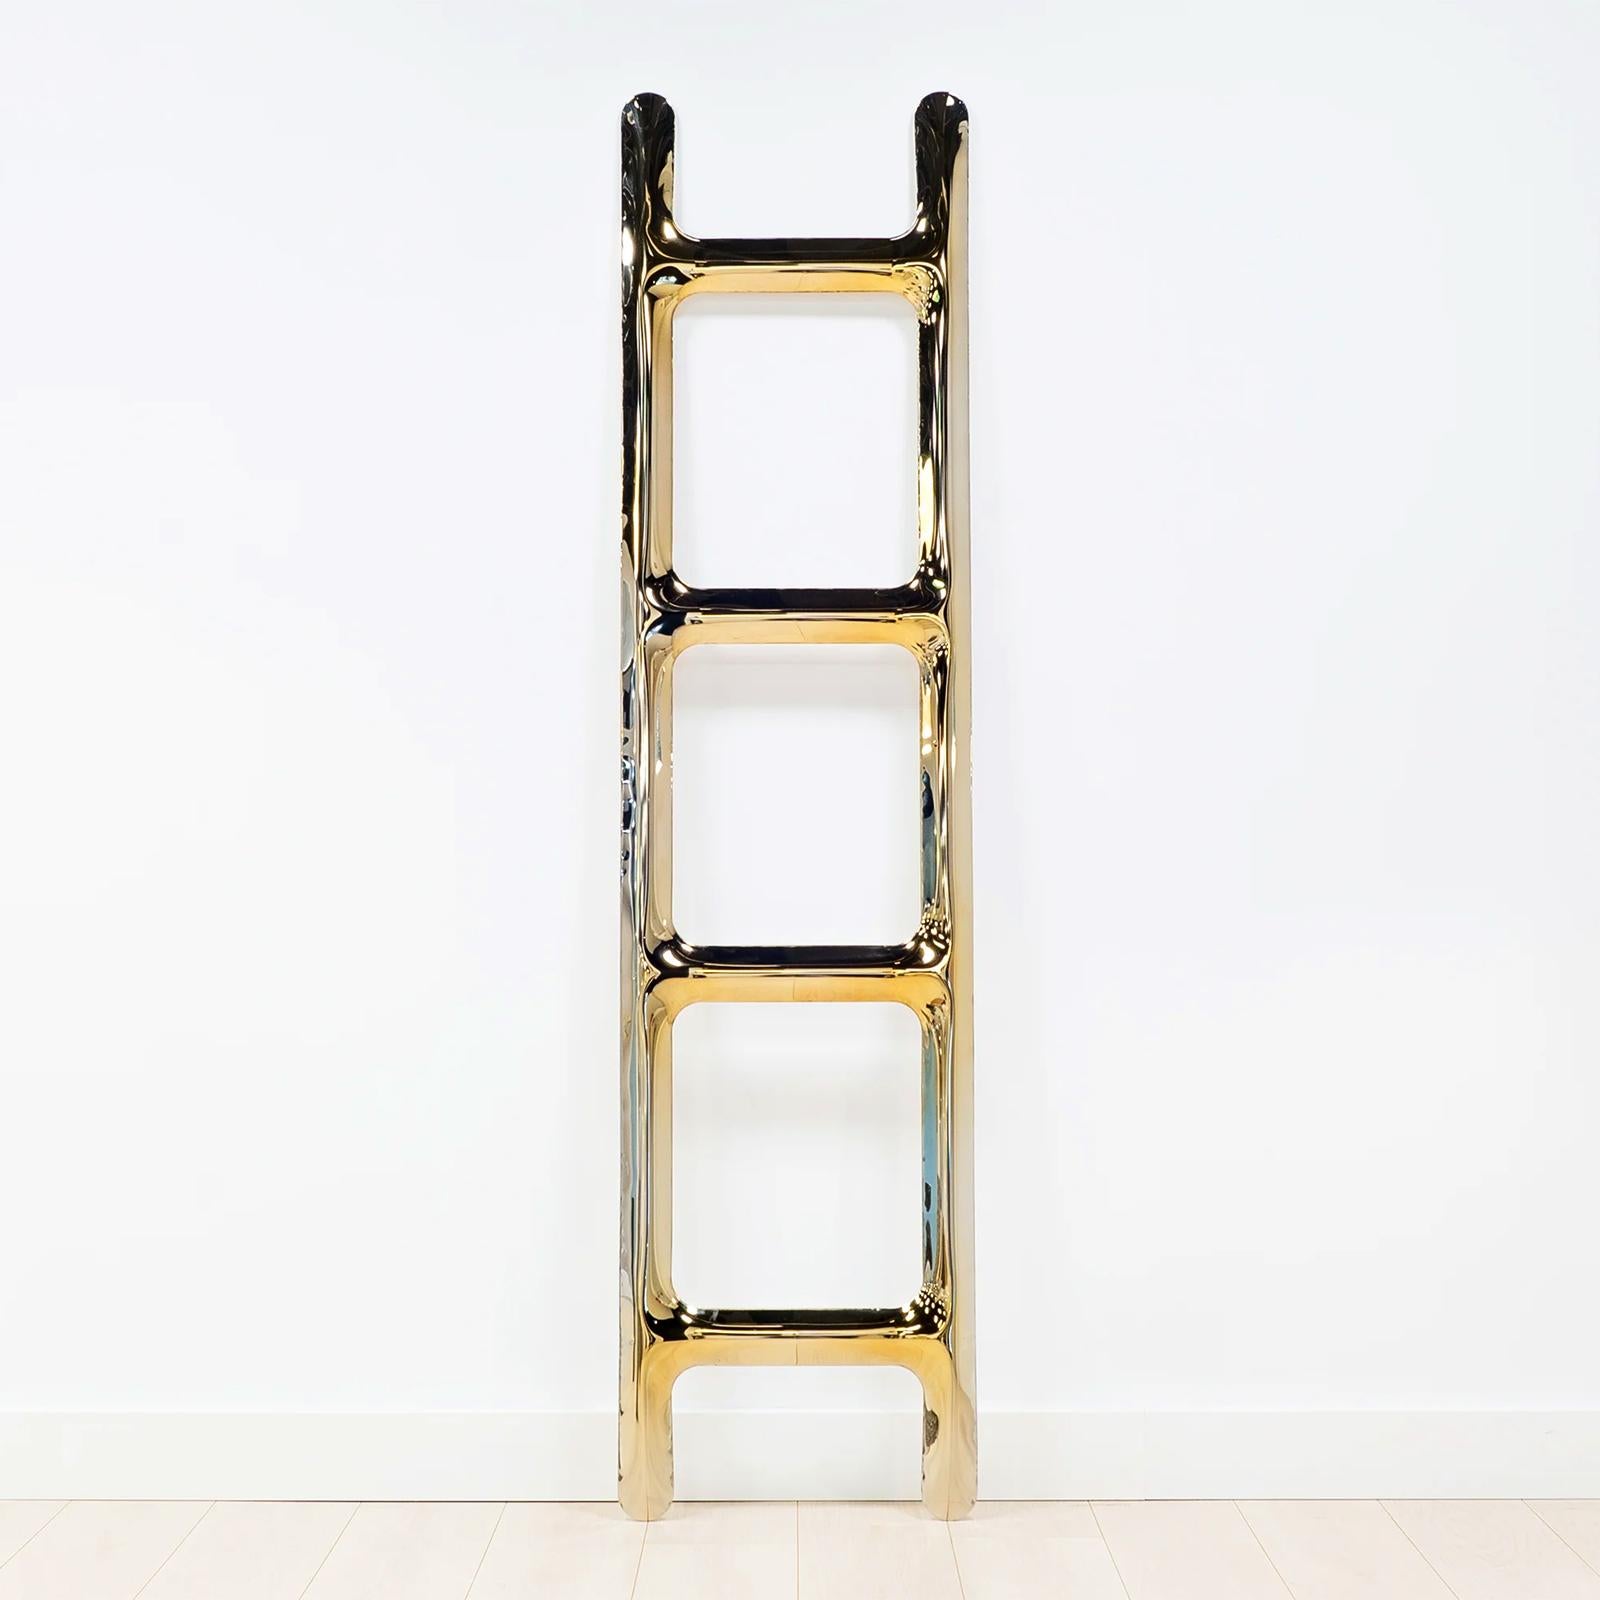 Ladder gold made in polished stainless steel
in gold finish, using bending properties of steel sheets.